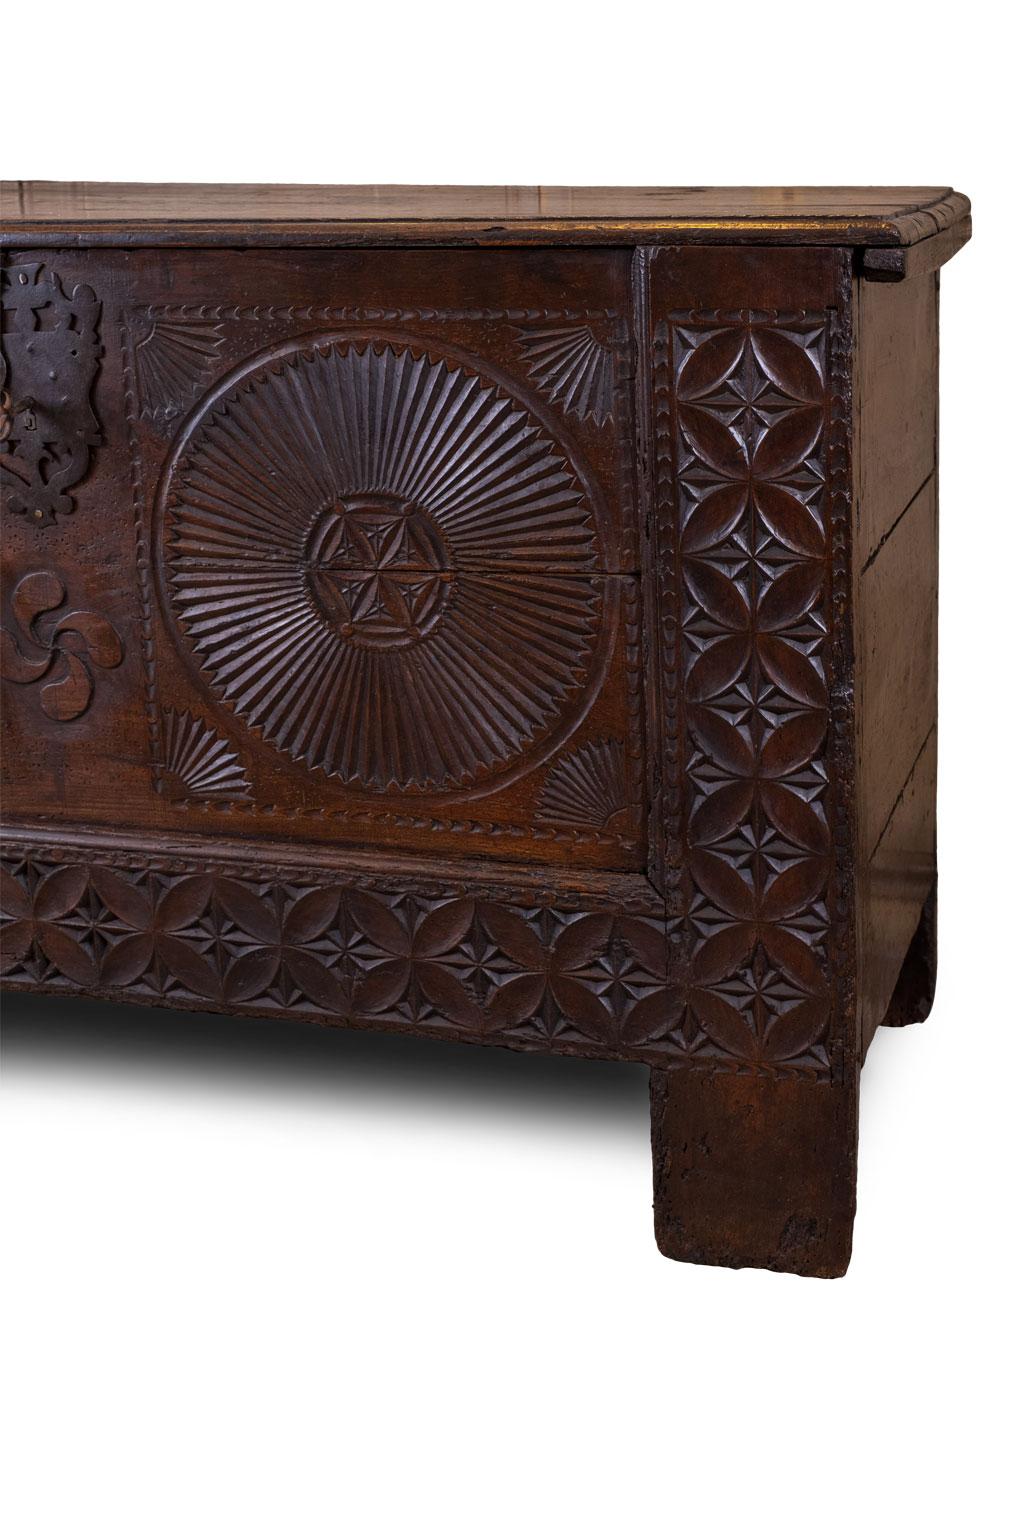 Carved Spanish chest, or coffer (or trunk), from Northern Spain. This late 18th century chest is decorated with geometric carvings and punch pattern designs, featuring a beautiful dark, rich patina and mortise and Tenon construction. Its original